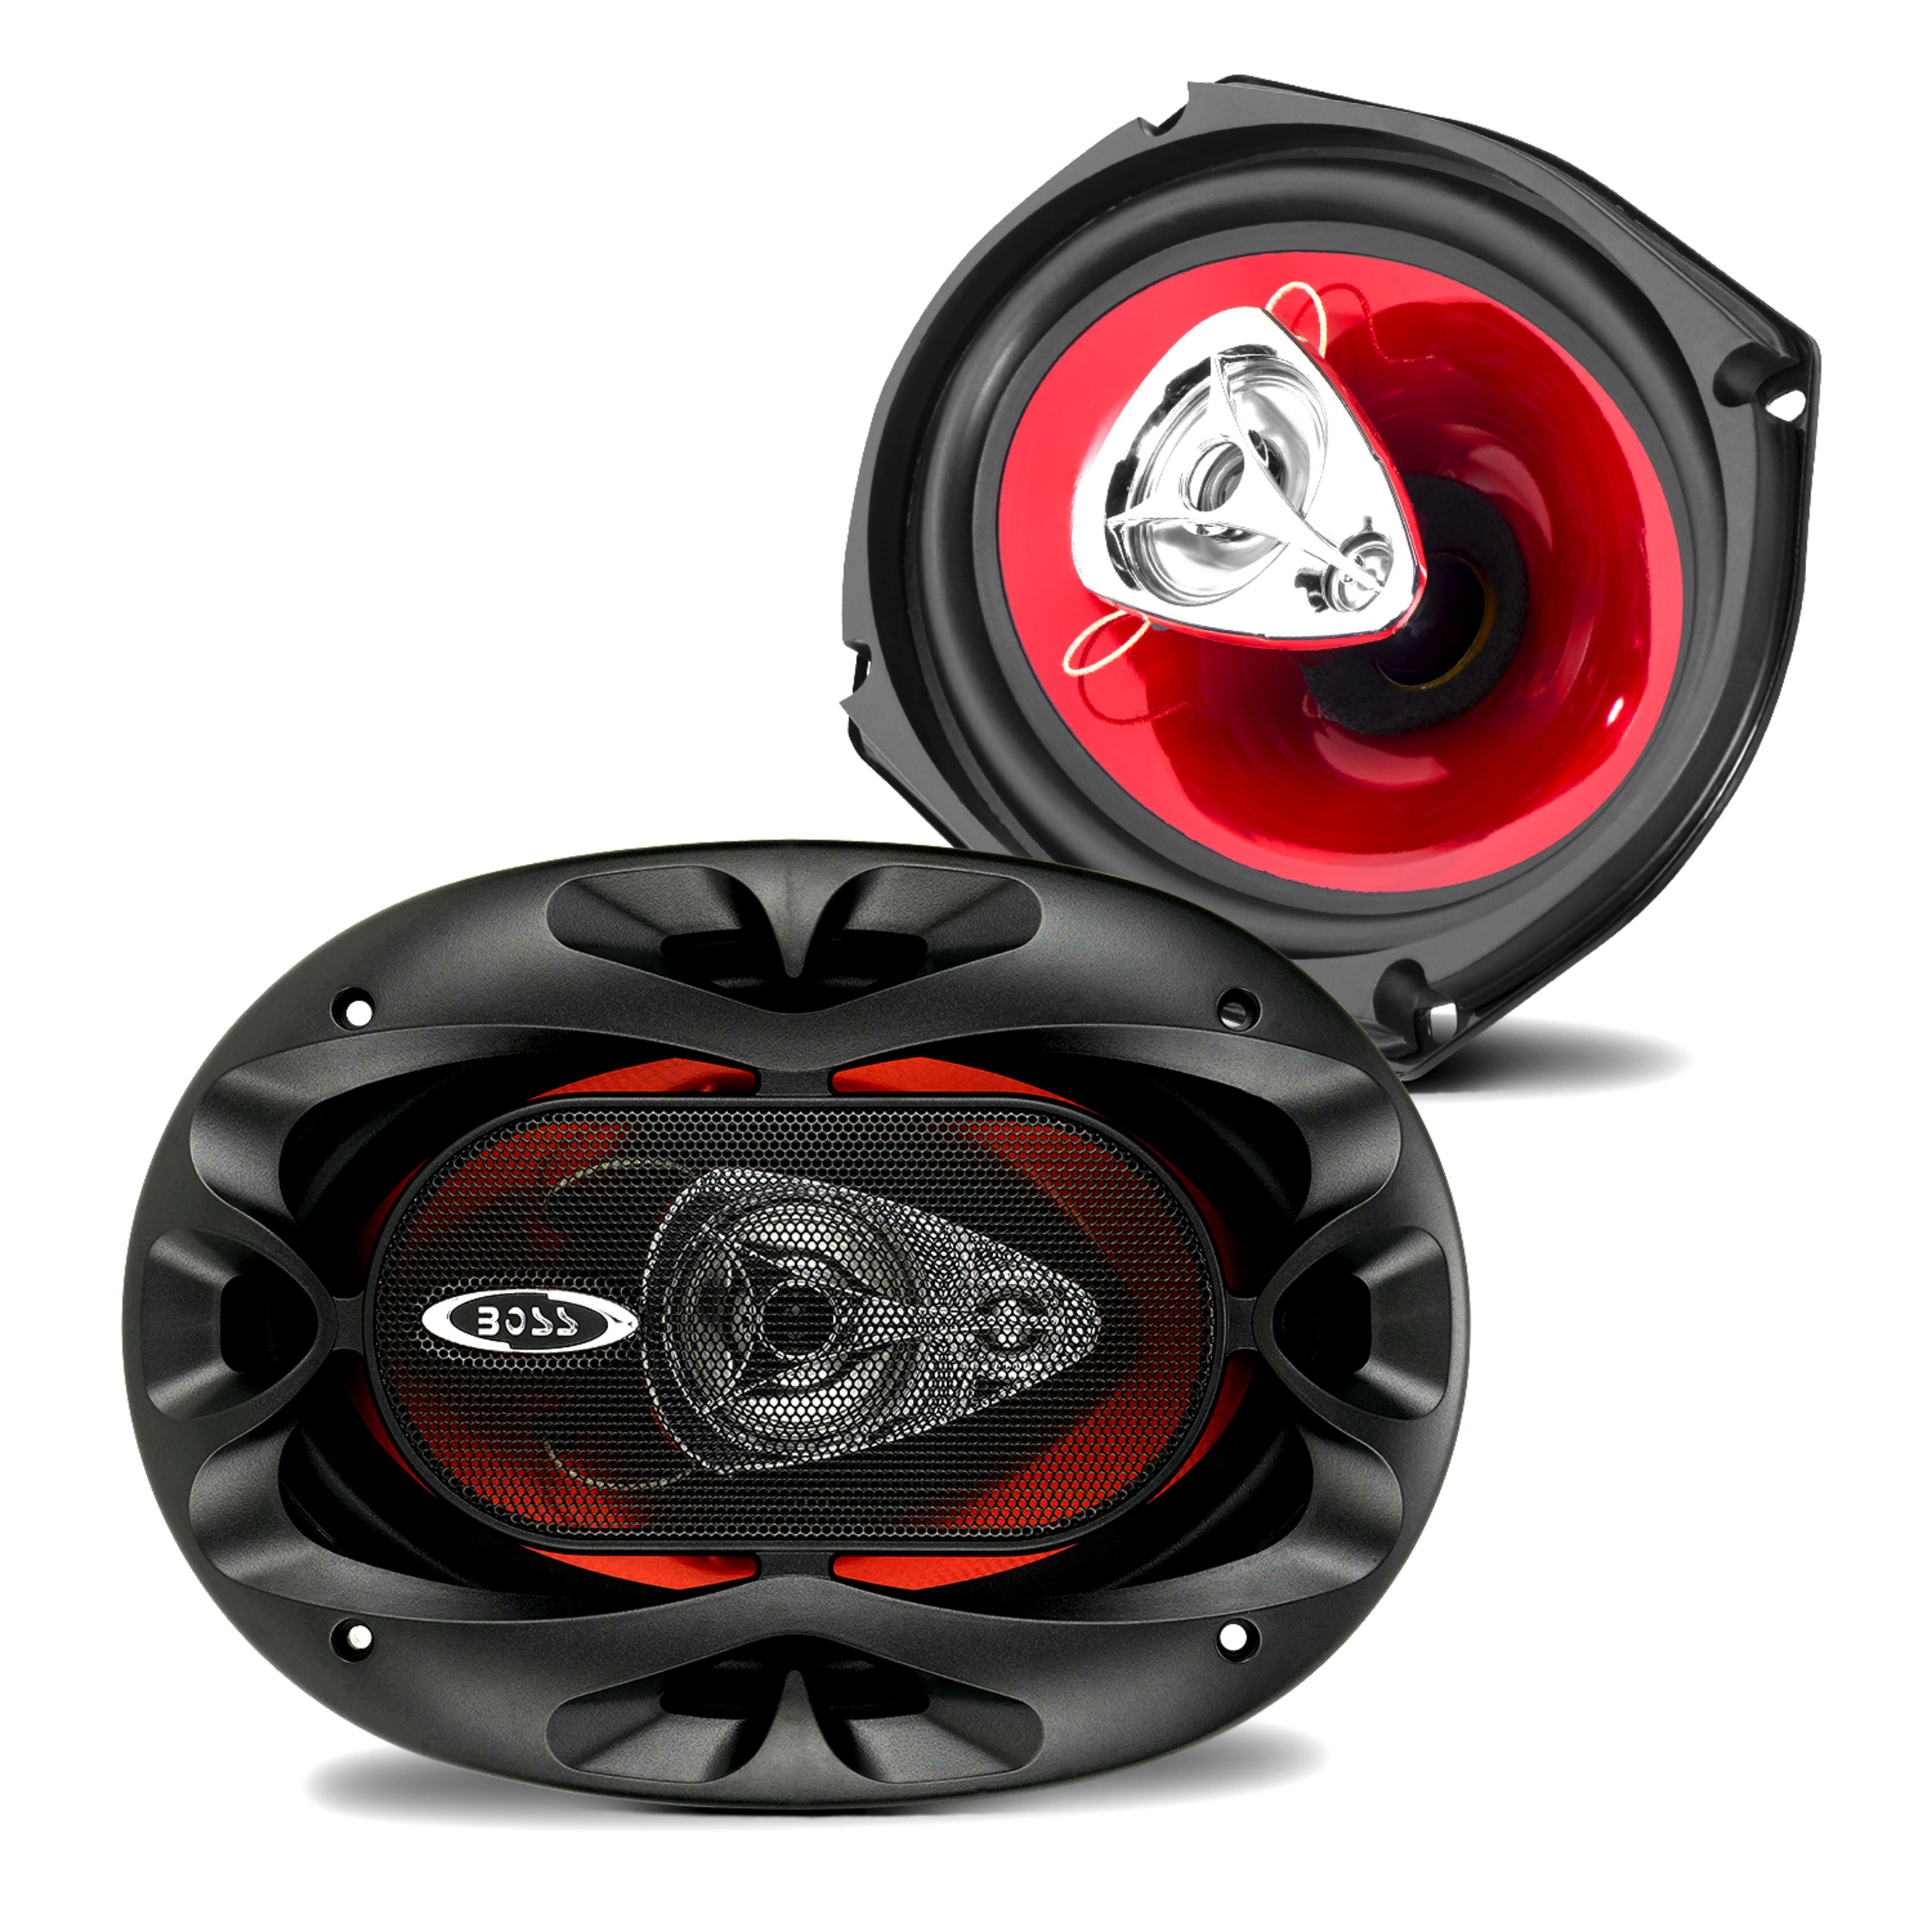 BOSS Audio Systems CH6930 Chaos Series 6 x 9 inch Car Stereo Door Speakers - 400 Watts Max, 3 Way, Full Range Audio, Tweeters, Coaxial, Sold in Pairs - image 5 of 12